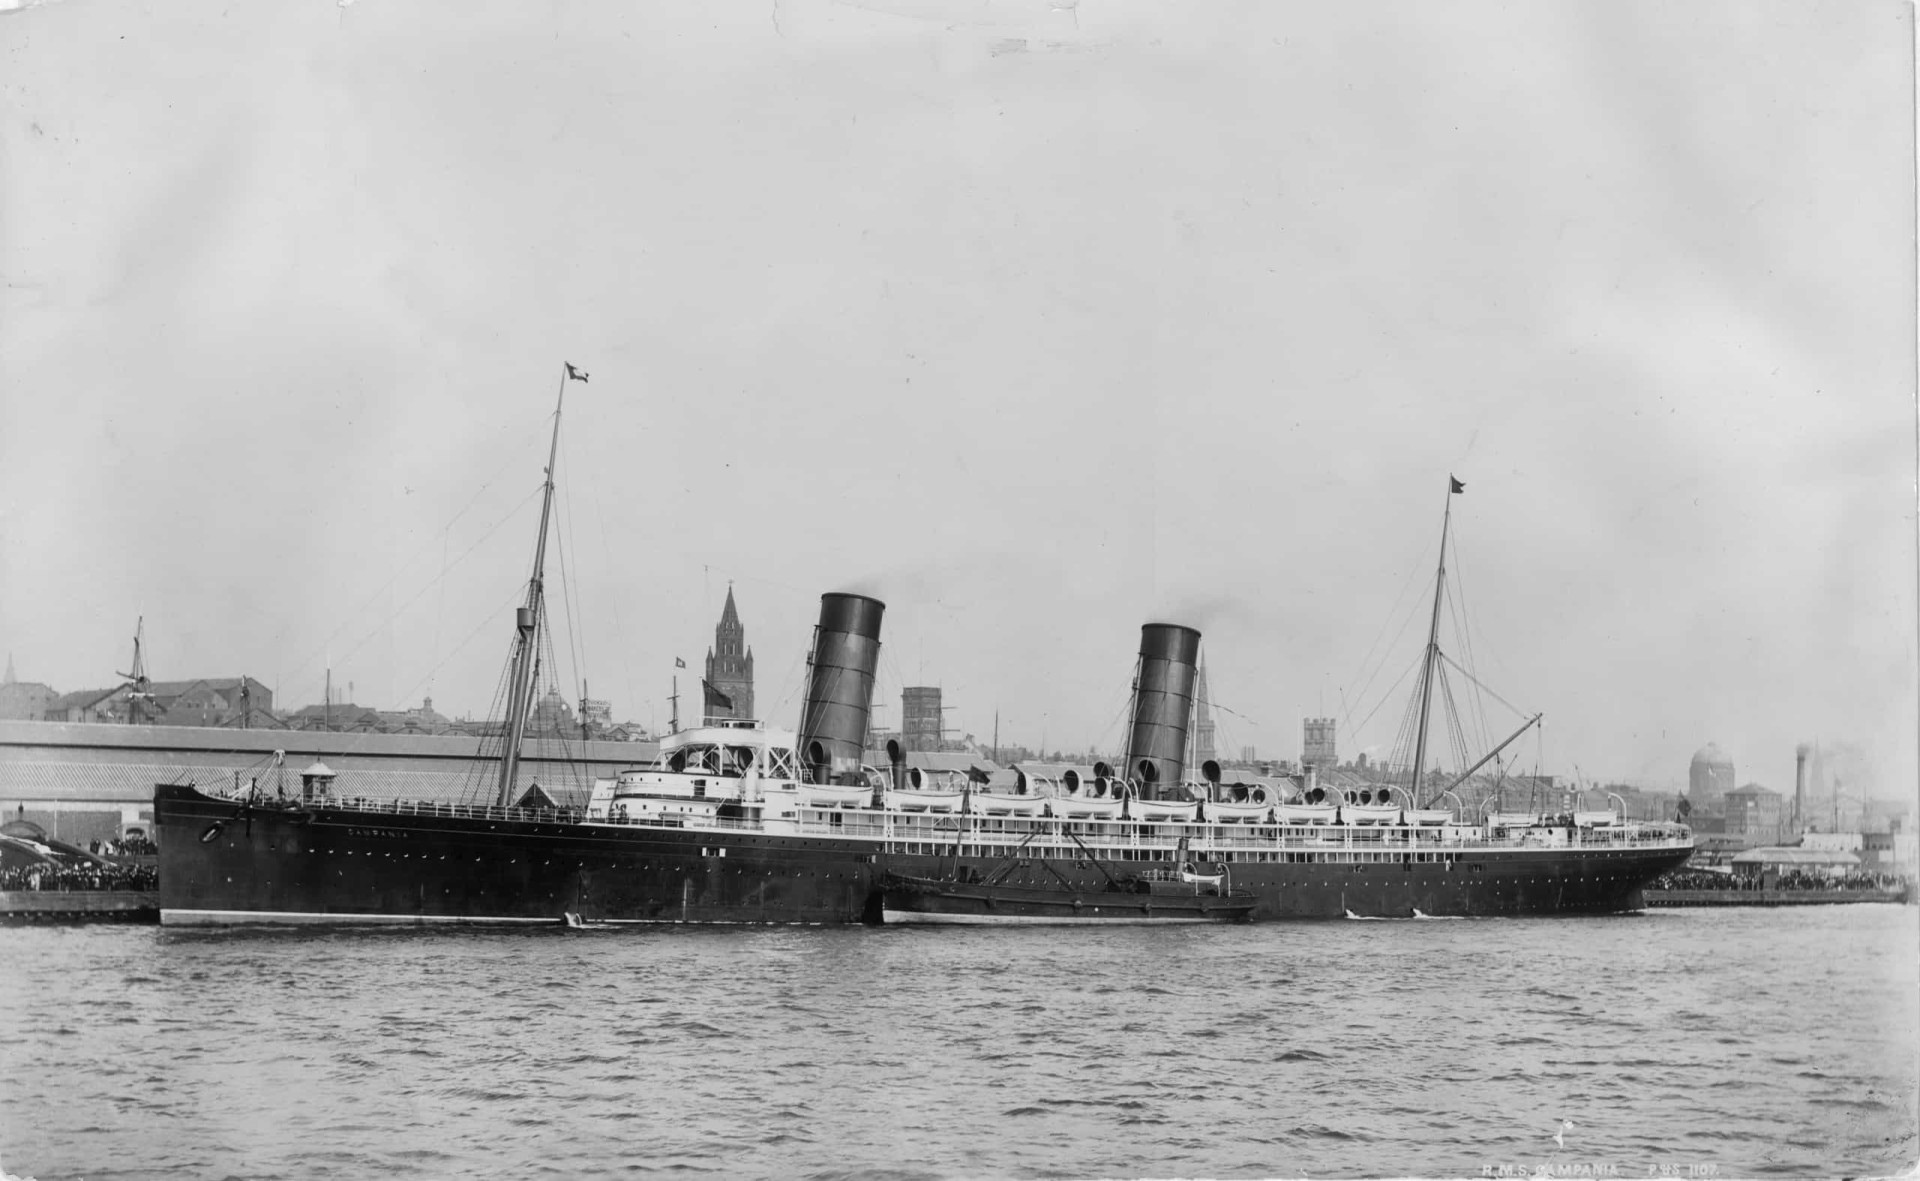 <p>Launched in September 1892, Cunard's RMS <em>Campania</em> was the largest and fastest passenger liner afloat when she entered service in 1893. She won the coveted Blue Riband for a less-than-six-day dash across the Atlantic Ocean.</p><p>You may also like:<a href="https://www.starsinsider.com/n/383619?utm_source=msn.com&utm_medium=display&utm_campaign=referral_description&utm_content=502910v1en-ae"> 30 Joey quotes that are better than "How you doin'?"</a></p>